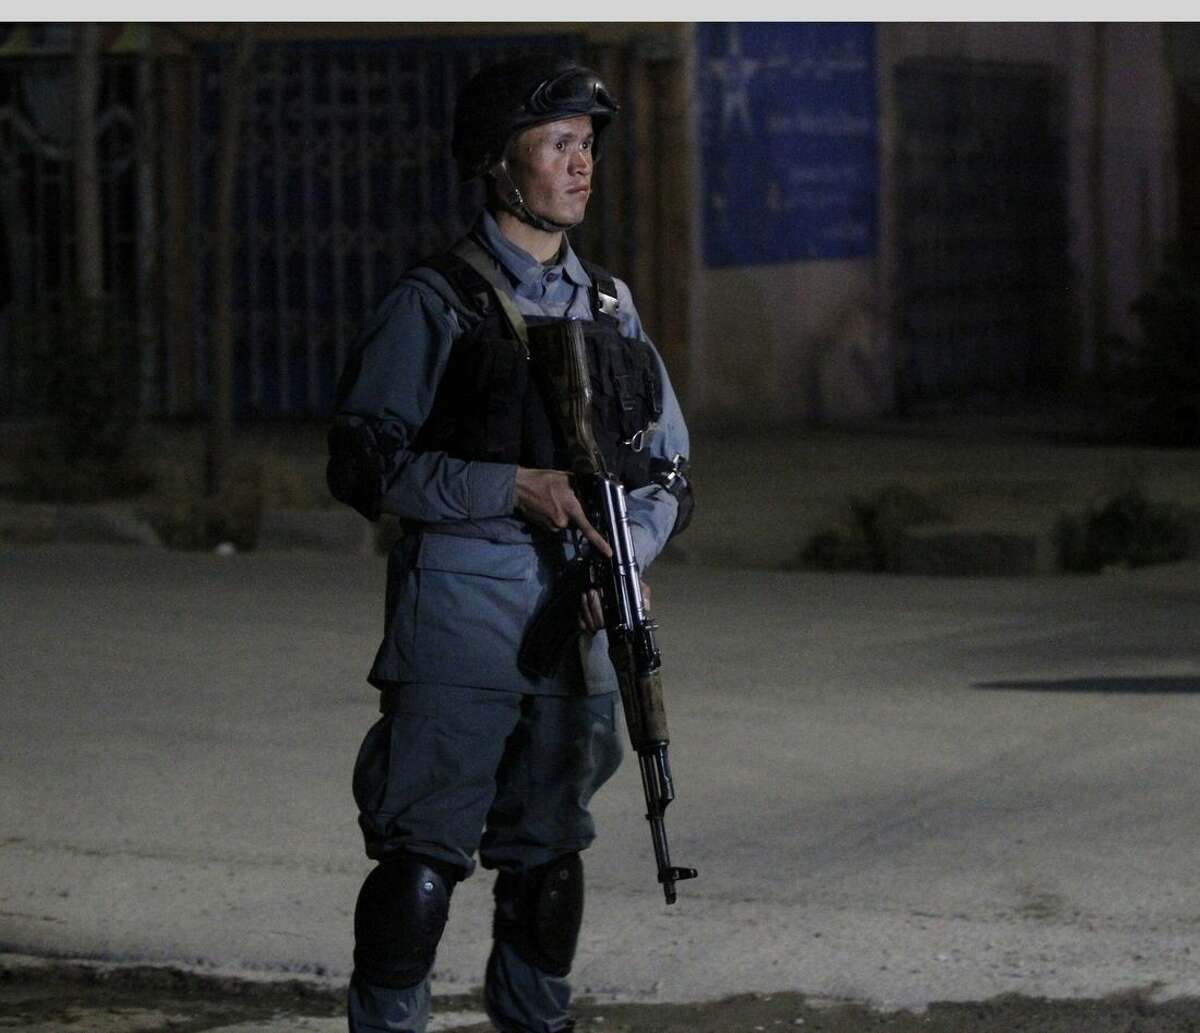 An Afghan policeman stands guard by the Park Palace Hotel after an attack by Taliban militants, in Kabul, Afghanistan, Wednesday, May 13, 2015. Gunmen have stormed a guesthouse in the Afghan capital used by both foreigners and locals, sparking a gun battle with police The attackers targeted Kabul's Park Palace Hotel on Wednesday night Kabul police chief Gen. Abdul Rahman Rahimi says the gunmen were still shooting at his officers. (AP Photo/Allauddin Khan)